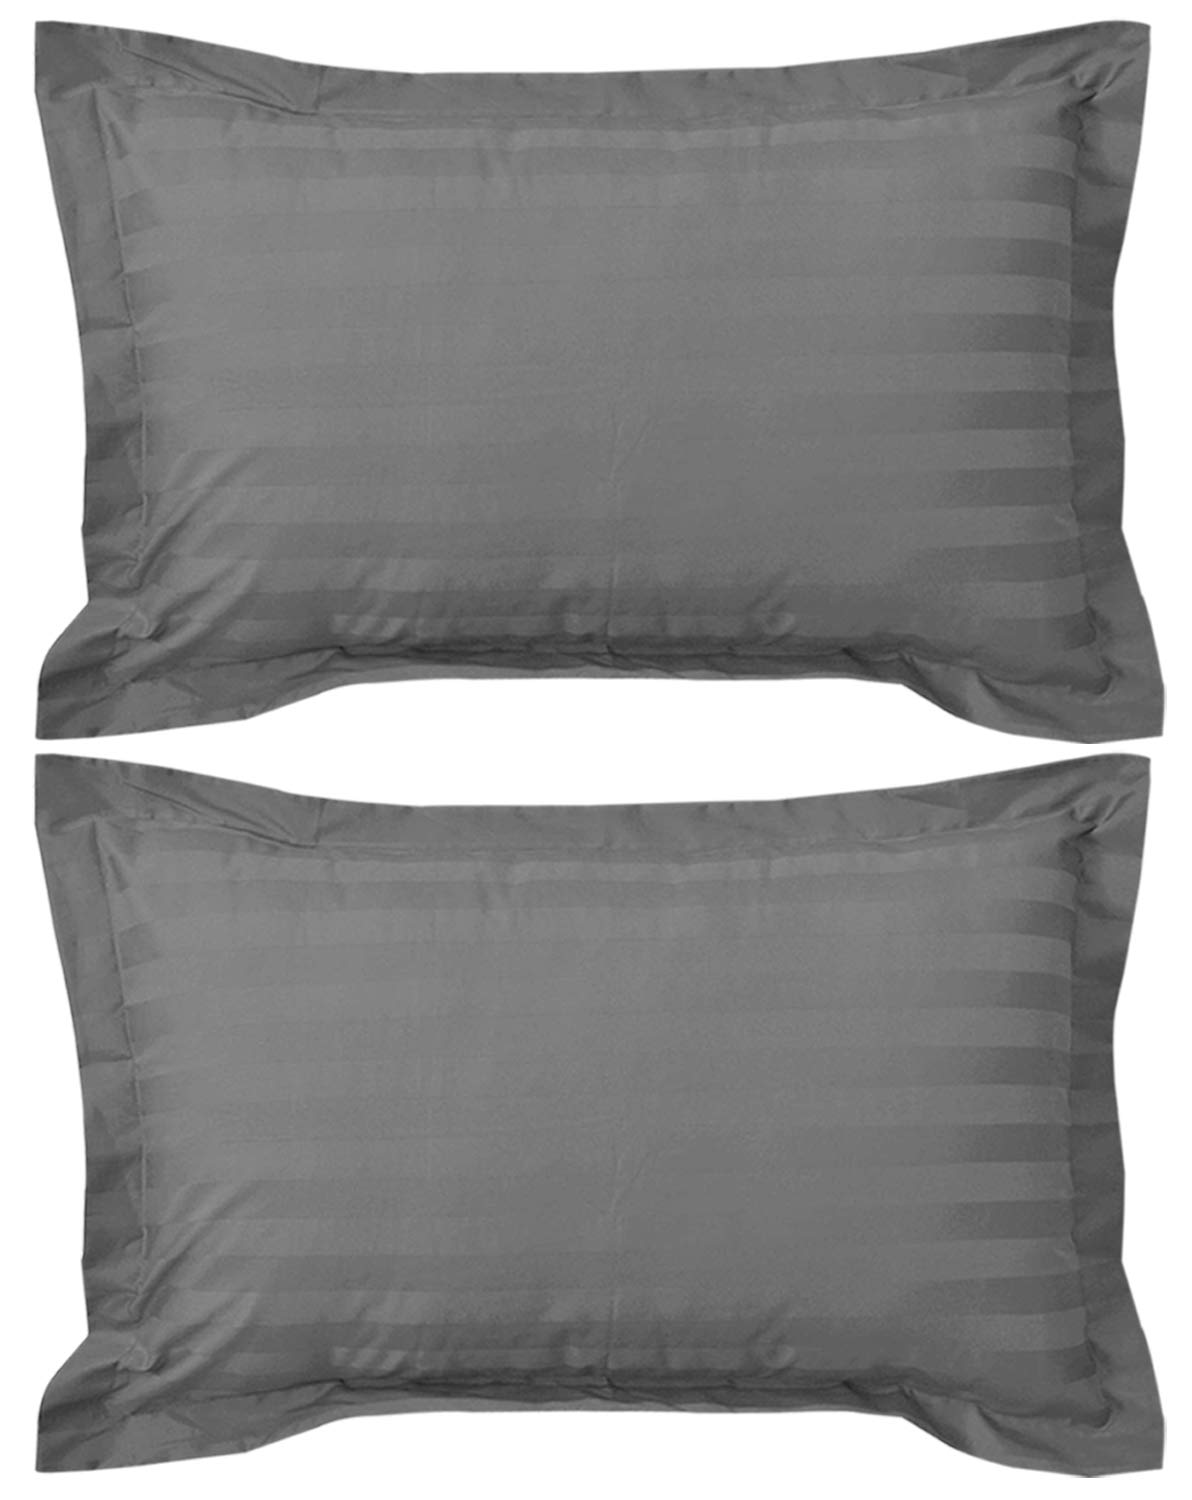 Heart Home 2 Pieces Cotton Luxurious Satin Striped Pillow Cover Set-17"x27" (Grey) - CTHH7183